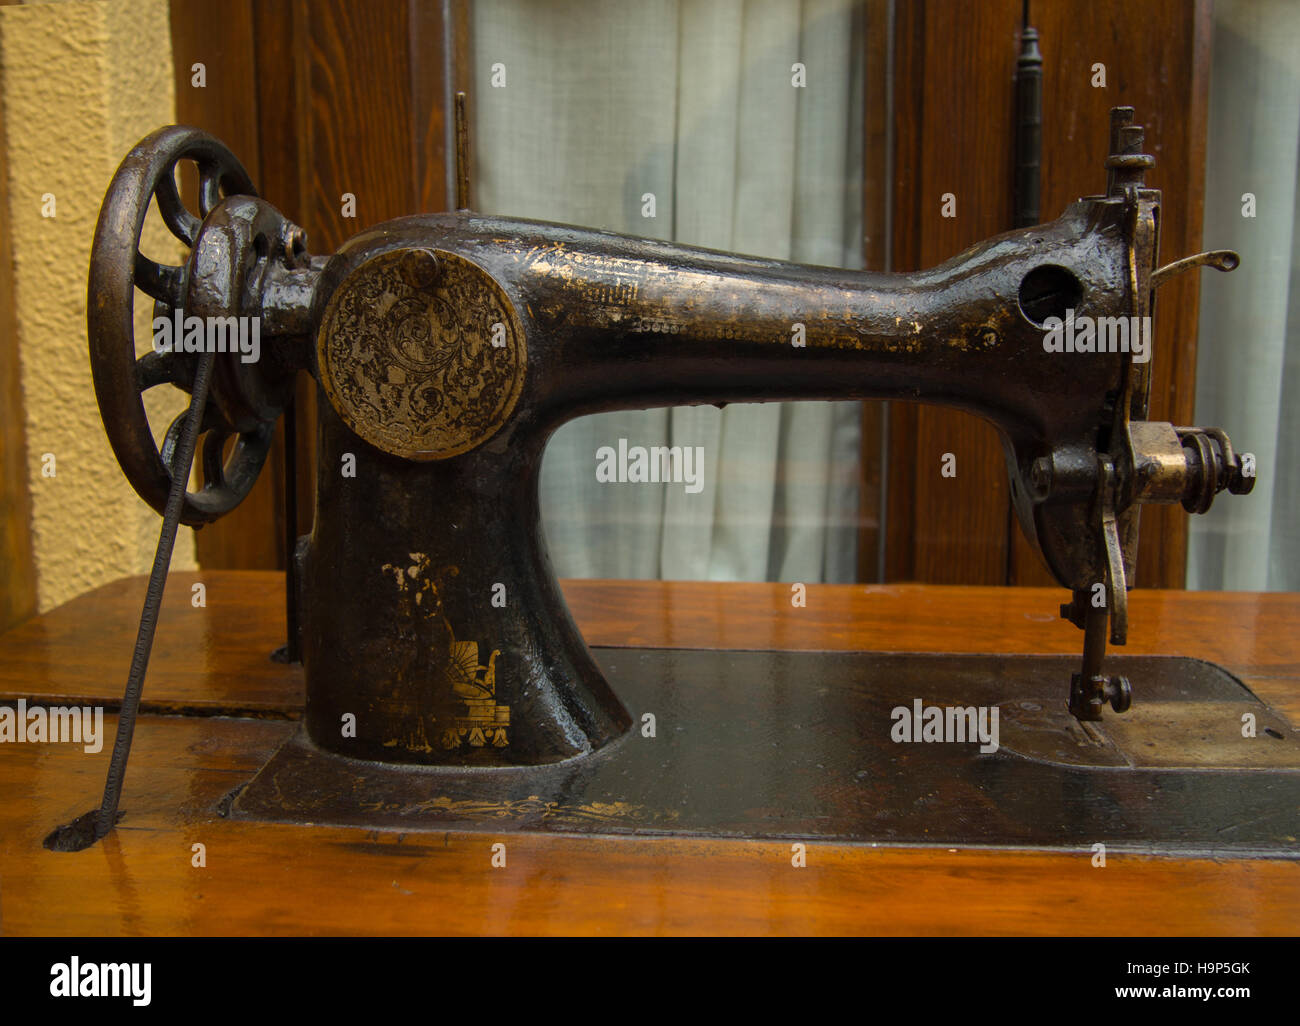 Old Sewing Machine Table On Brown Stock Photo 126491811 Alamy